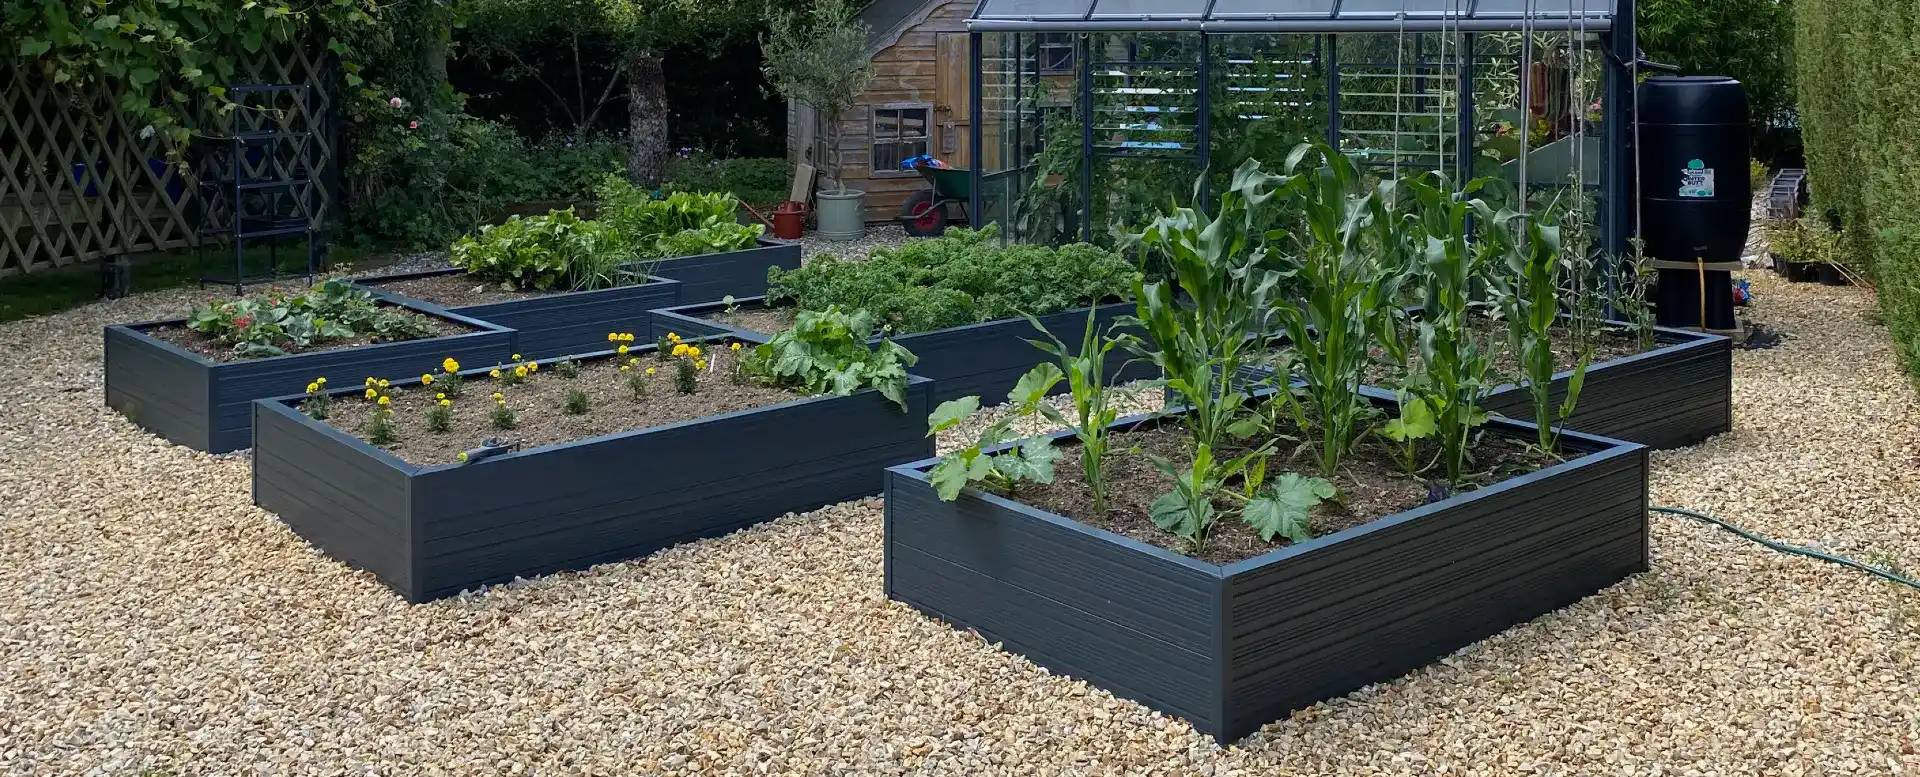 Rhino Raised beds in front of greenhouse